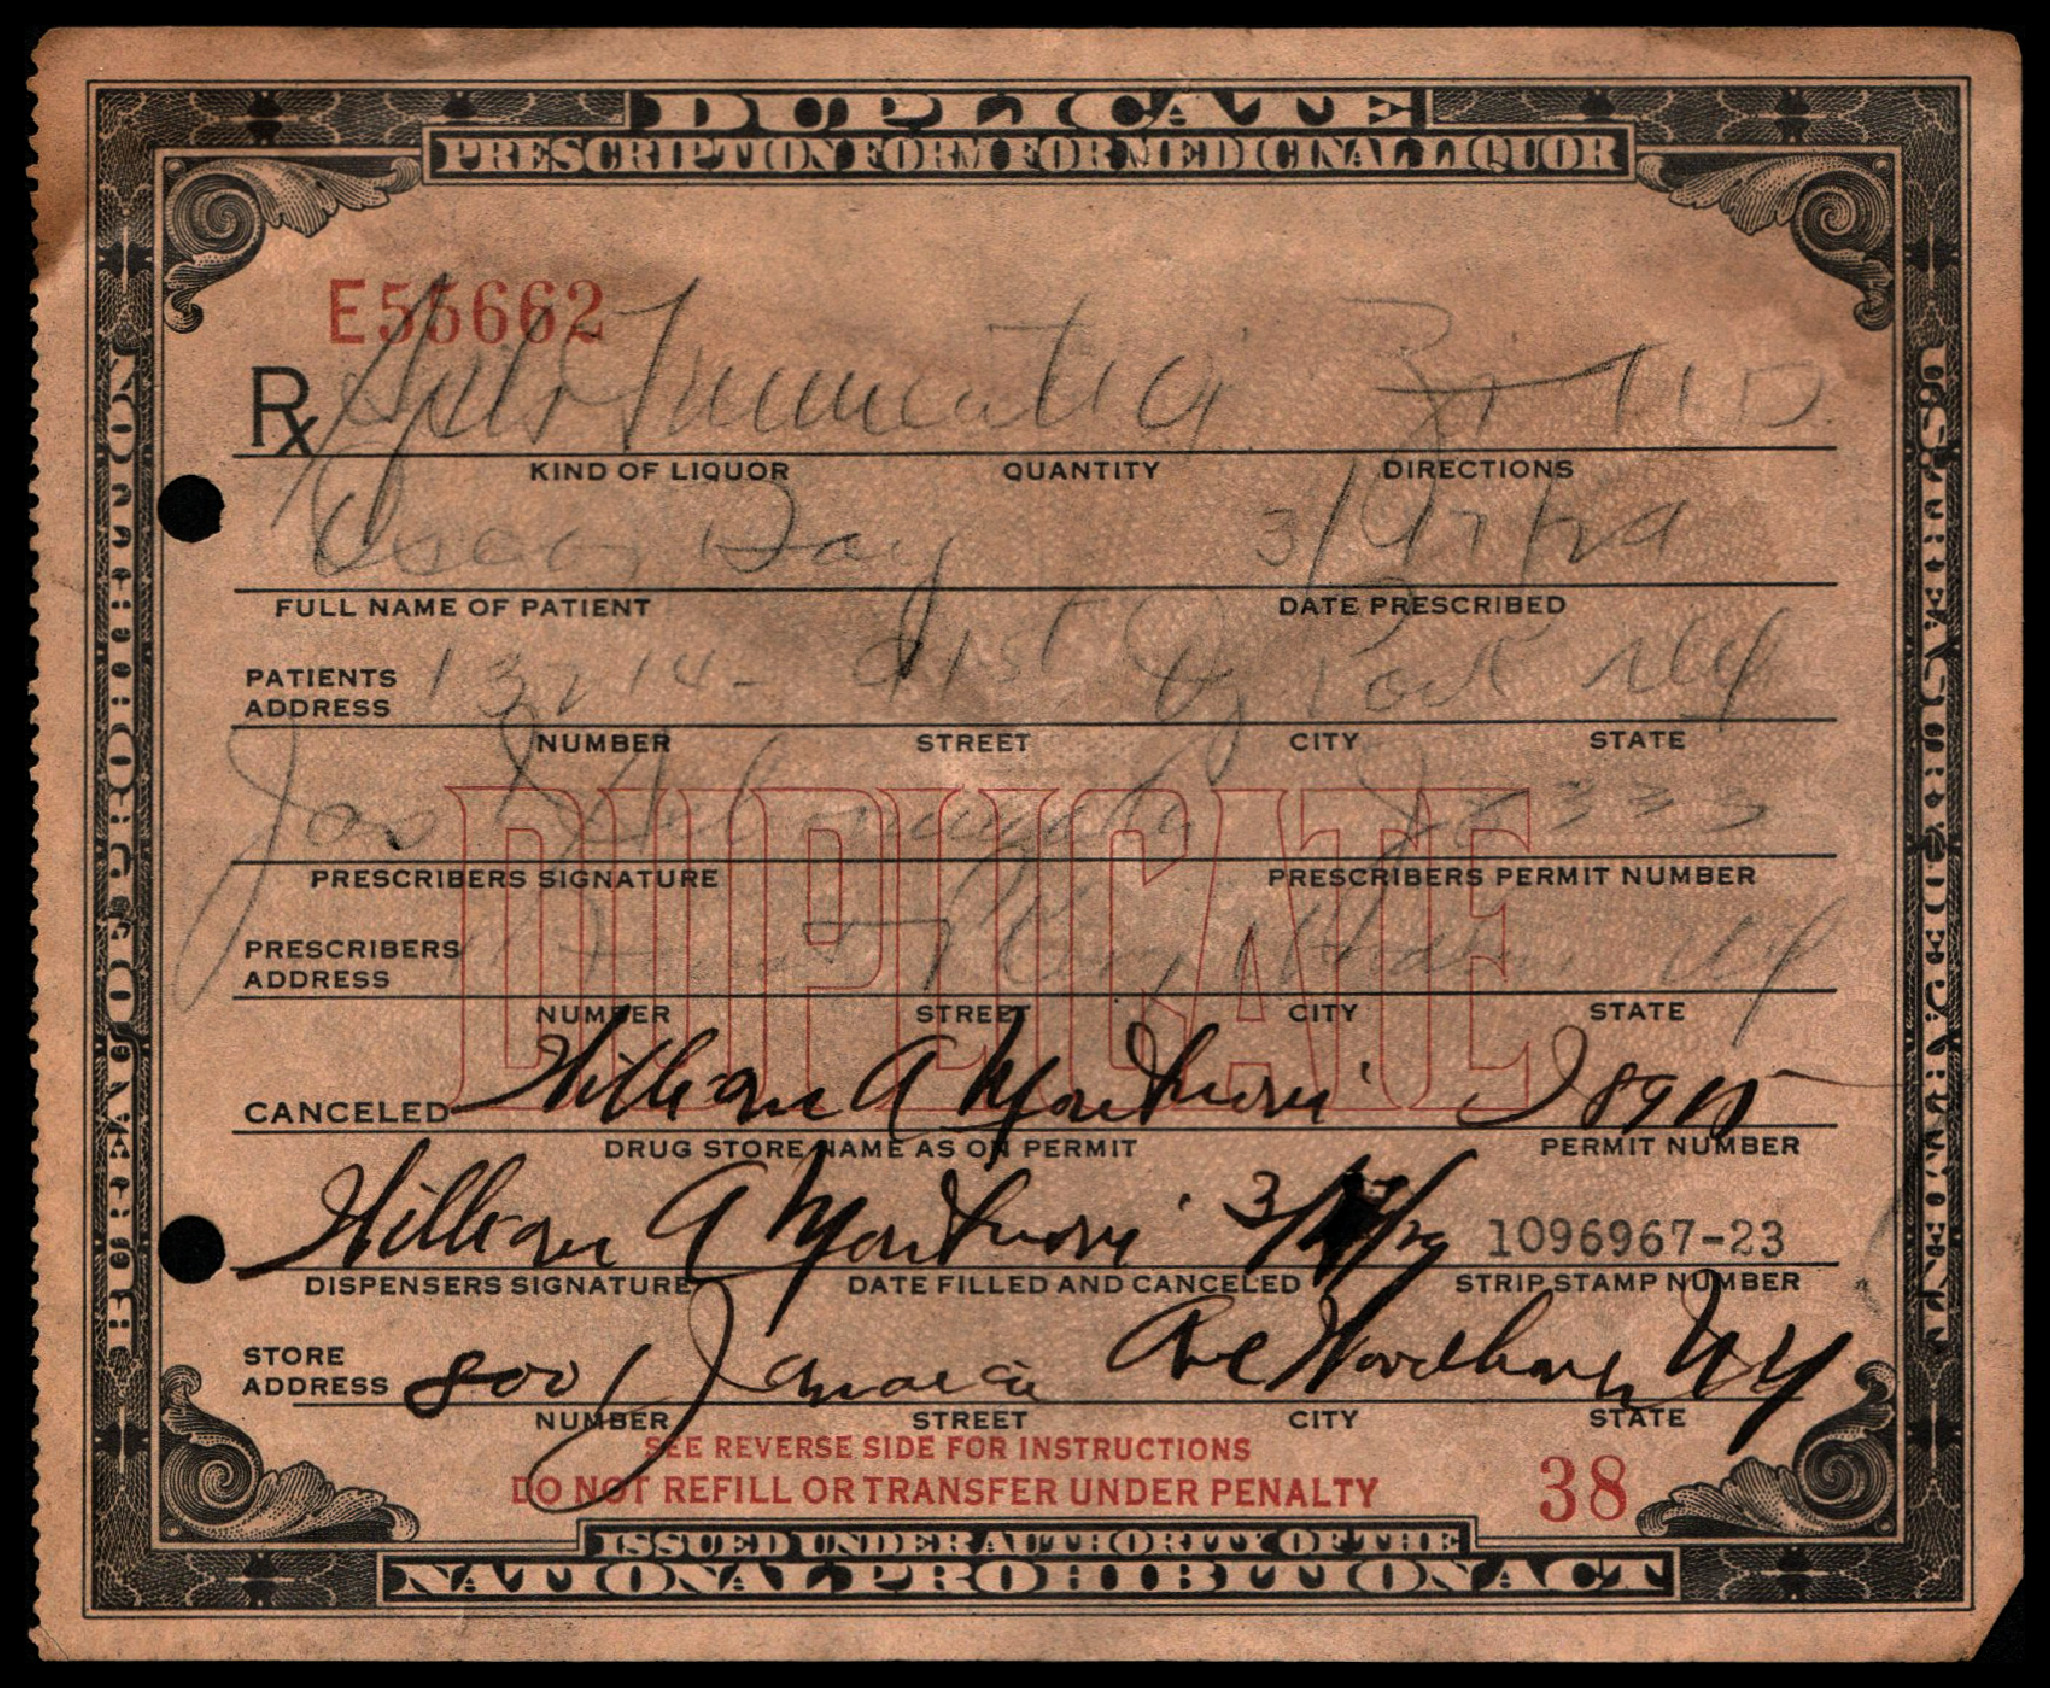 National Prohibition Act prescription for 1 pint of whiskey. Type of liquor is specified as "Spts (spiritus) Frumenti," literally "the spirit (or life) of grain." Prescribed to Oscar Day on March 17th, 1929.